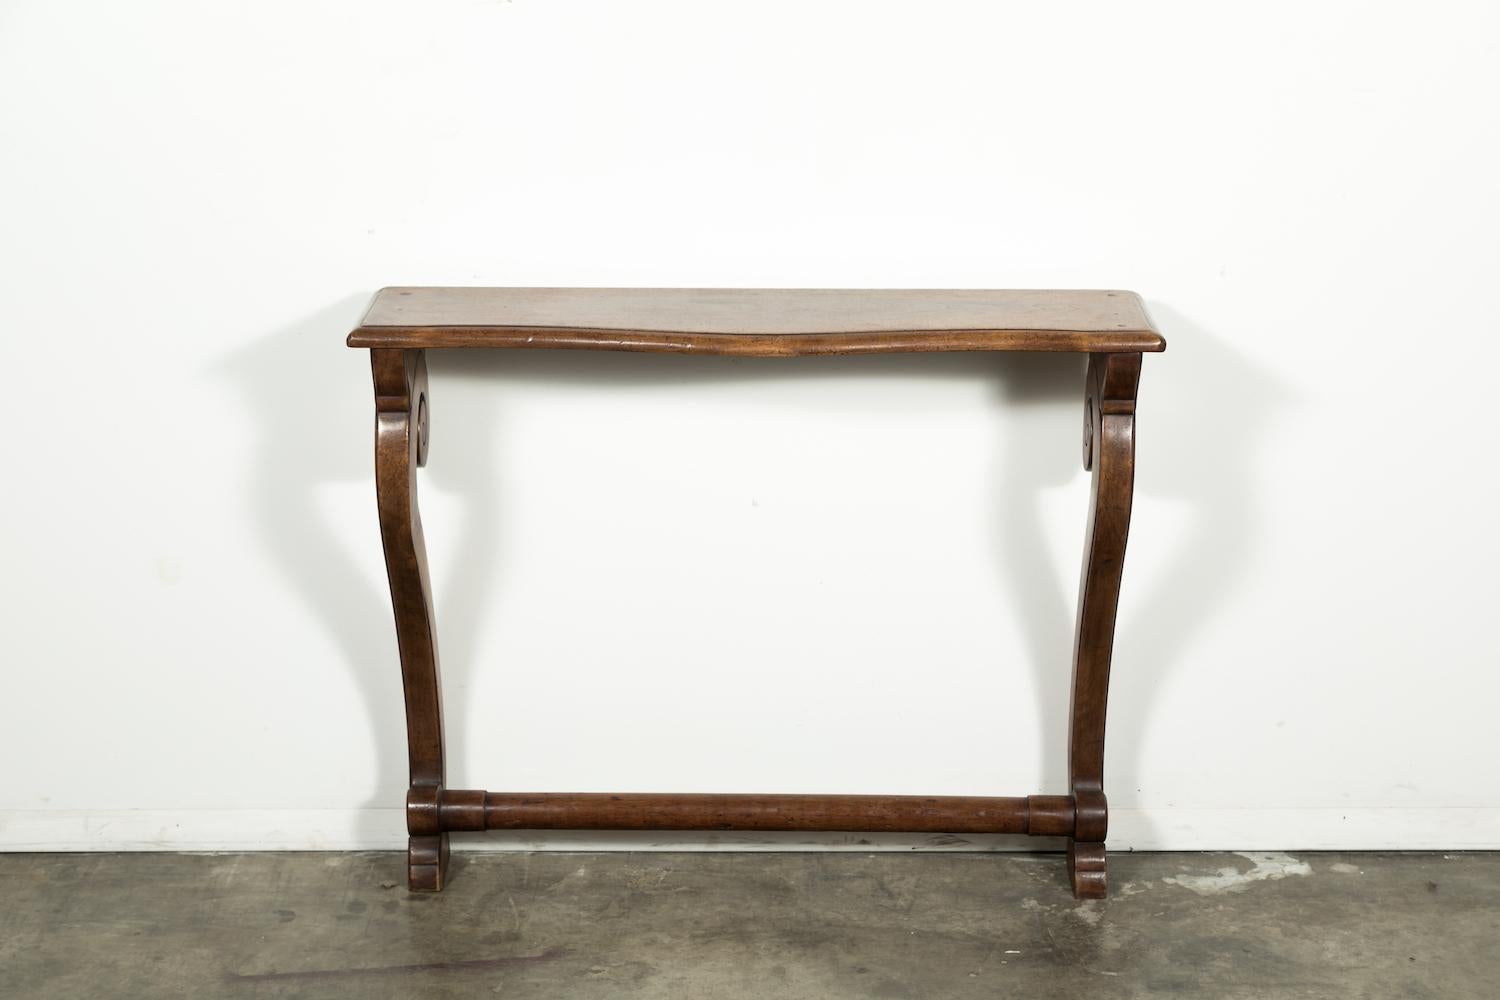 Very elegant hand carved French Empire period wall mount console supported by down-swept scrolling legs joined by a circular stretcher. The narrow depth of this console makes it a very versatile piece and its graceful curves and simplicity allow it